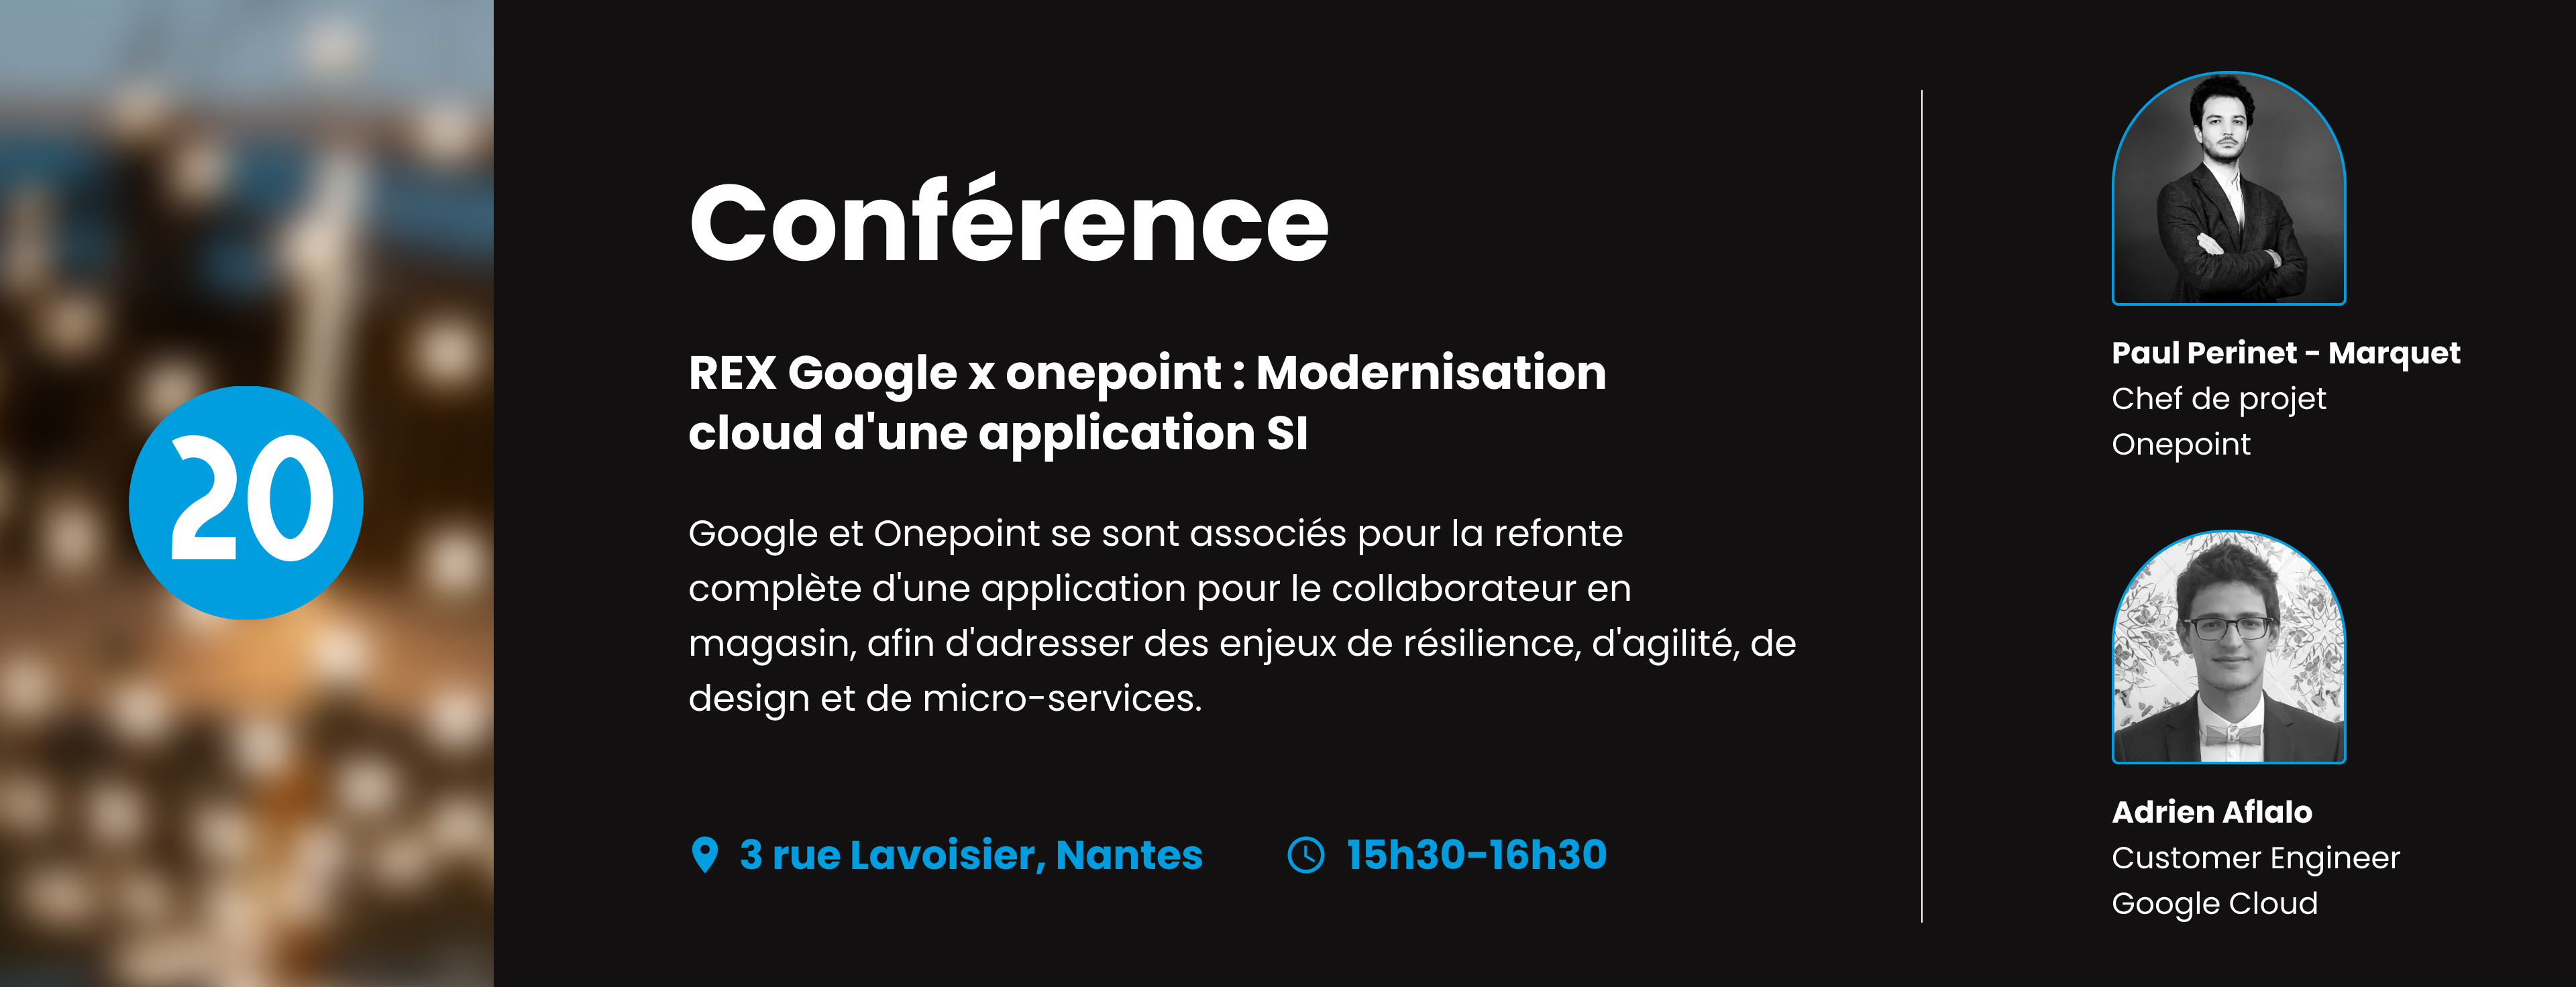 Conférence google x onepoint de l'inauguration onepoint à Nantes